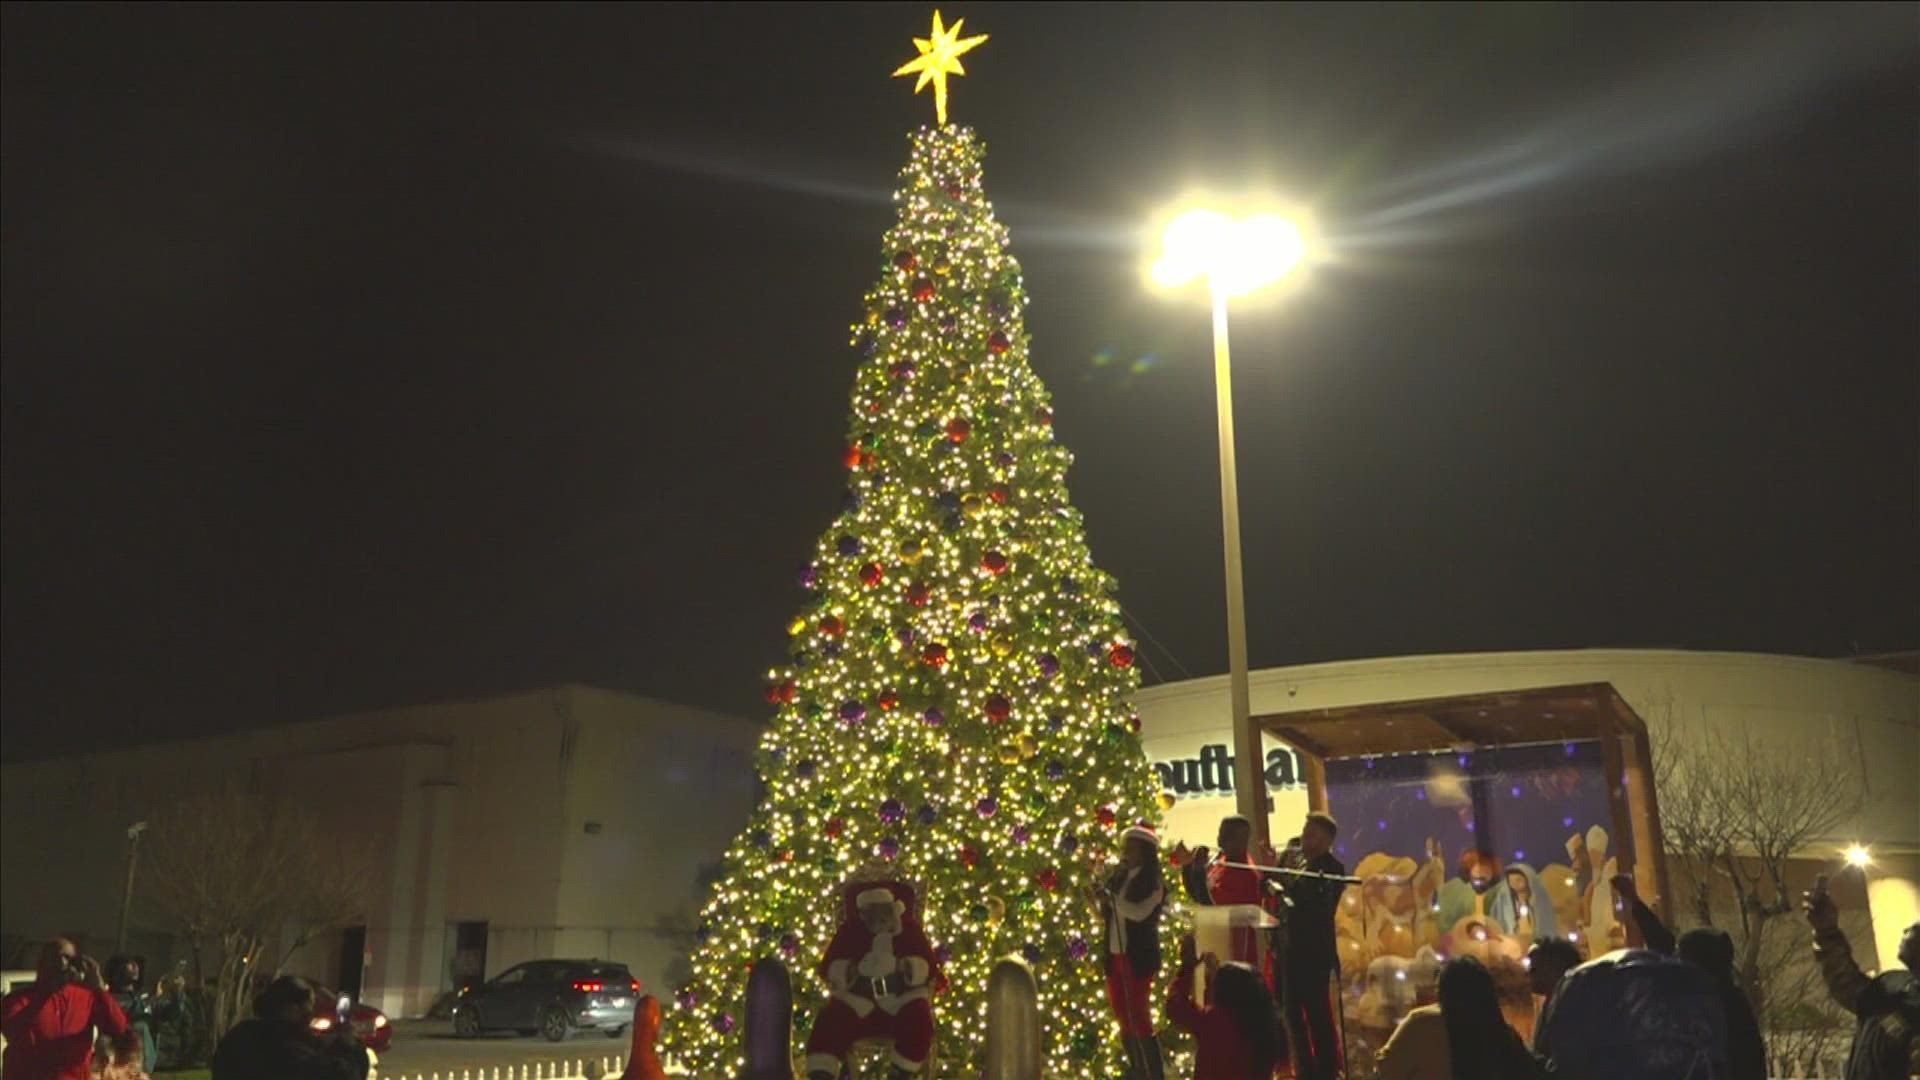 The new tree was purchased through a community fundraiser after backlash over a first tree.